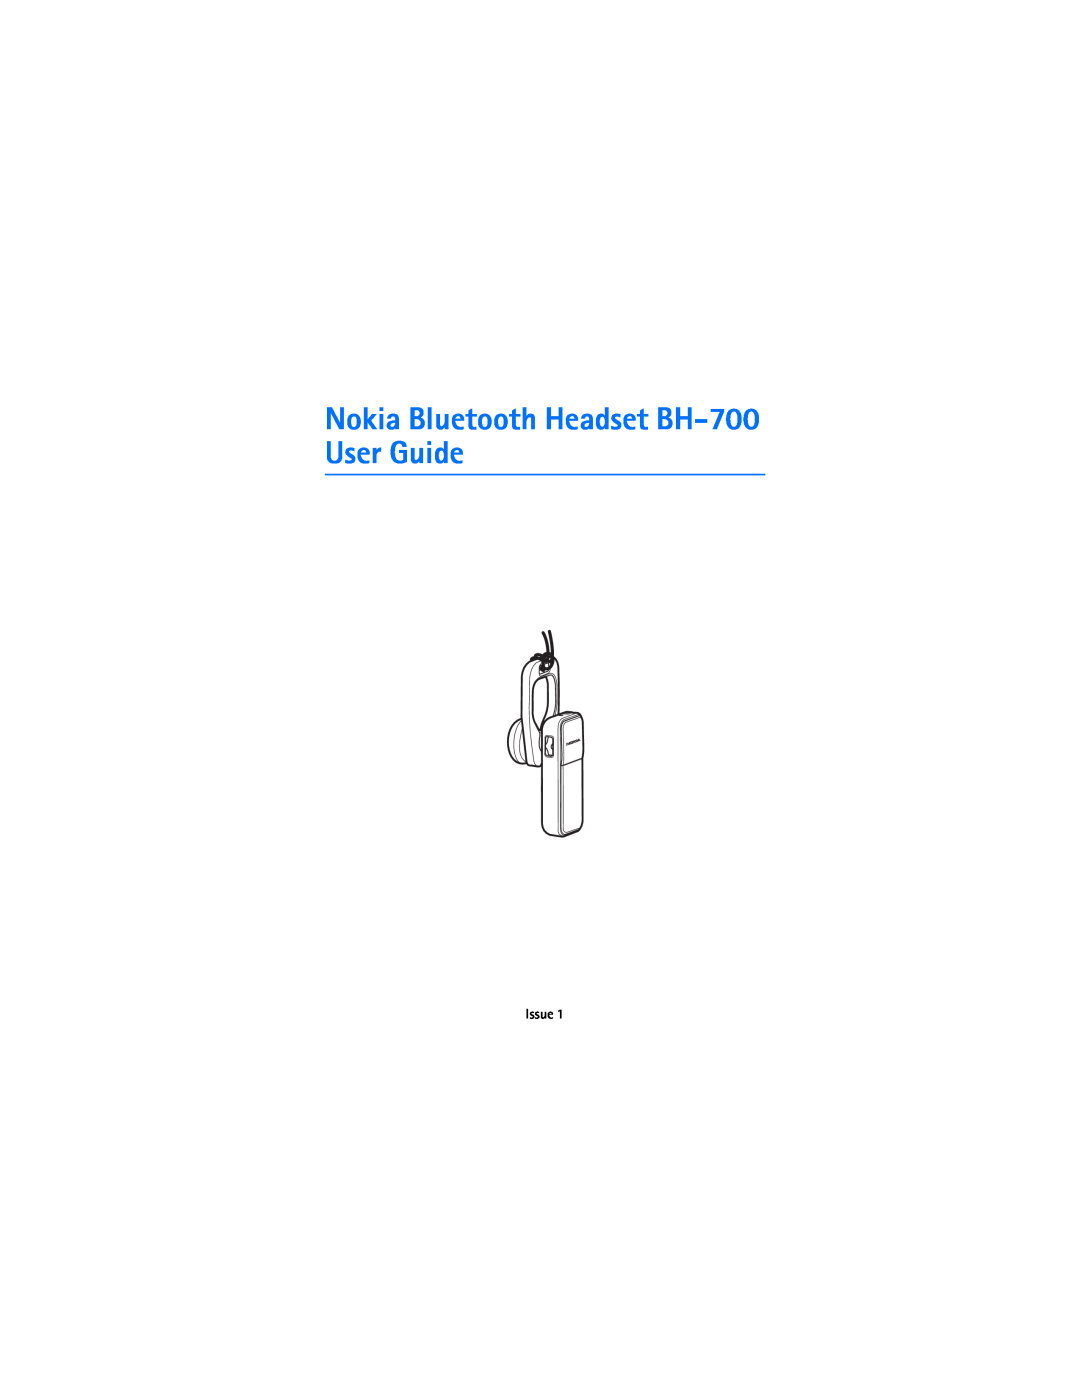 Nokia manual Nokia Bluetooth Headset BH-700User Guide, Issue 